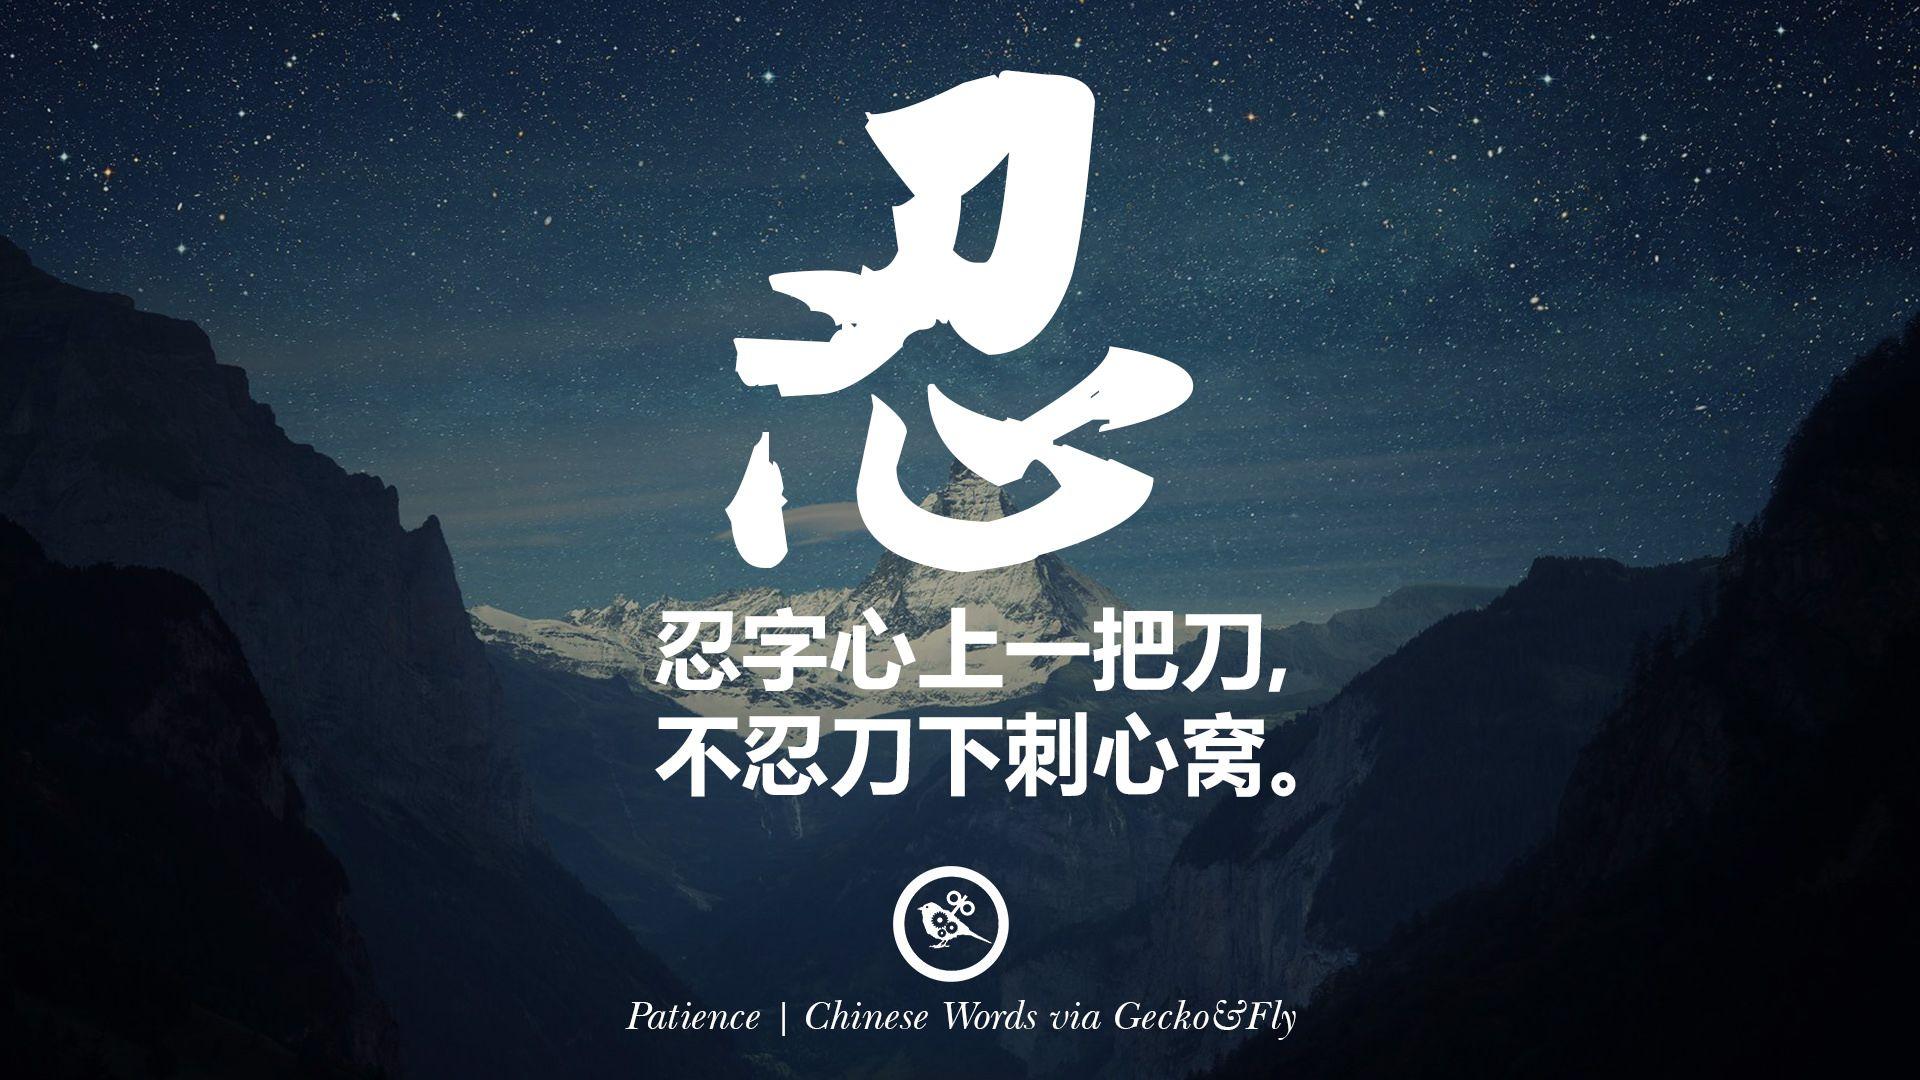 Aesthetic Chinese Words Wallpaper Tumblr